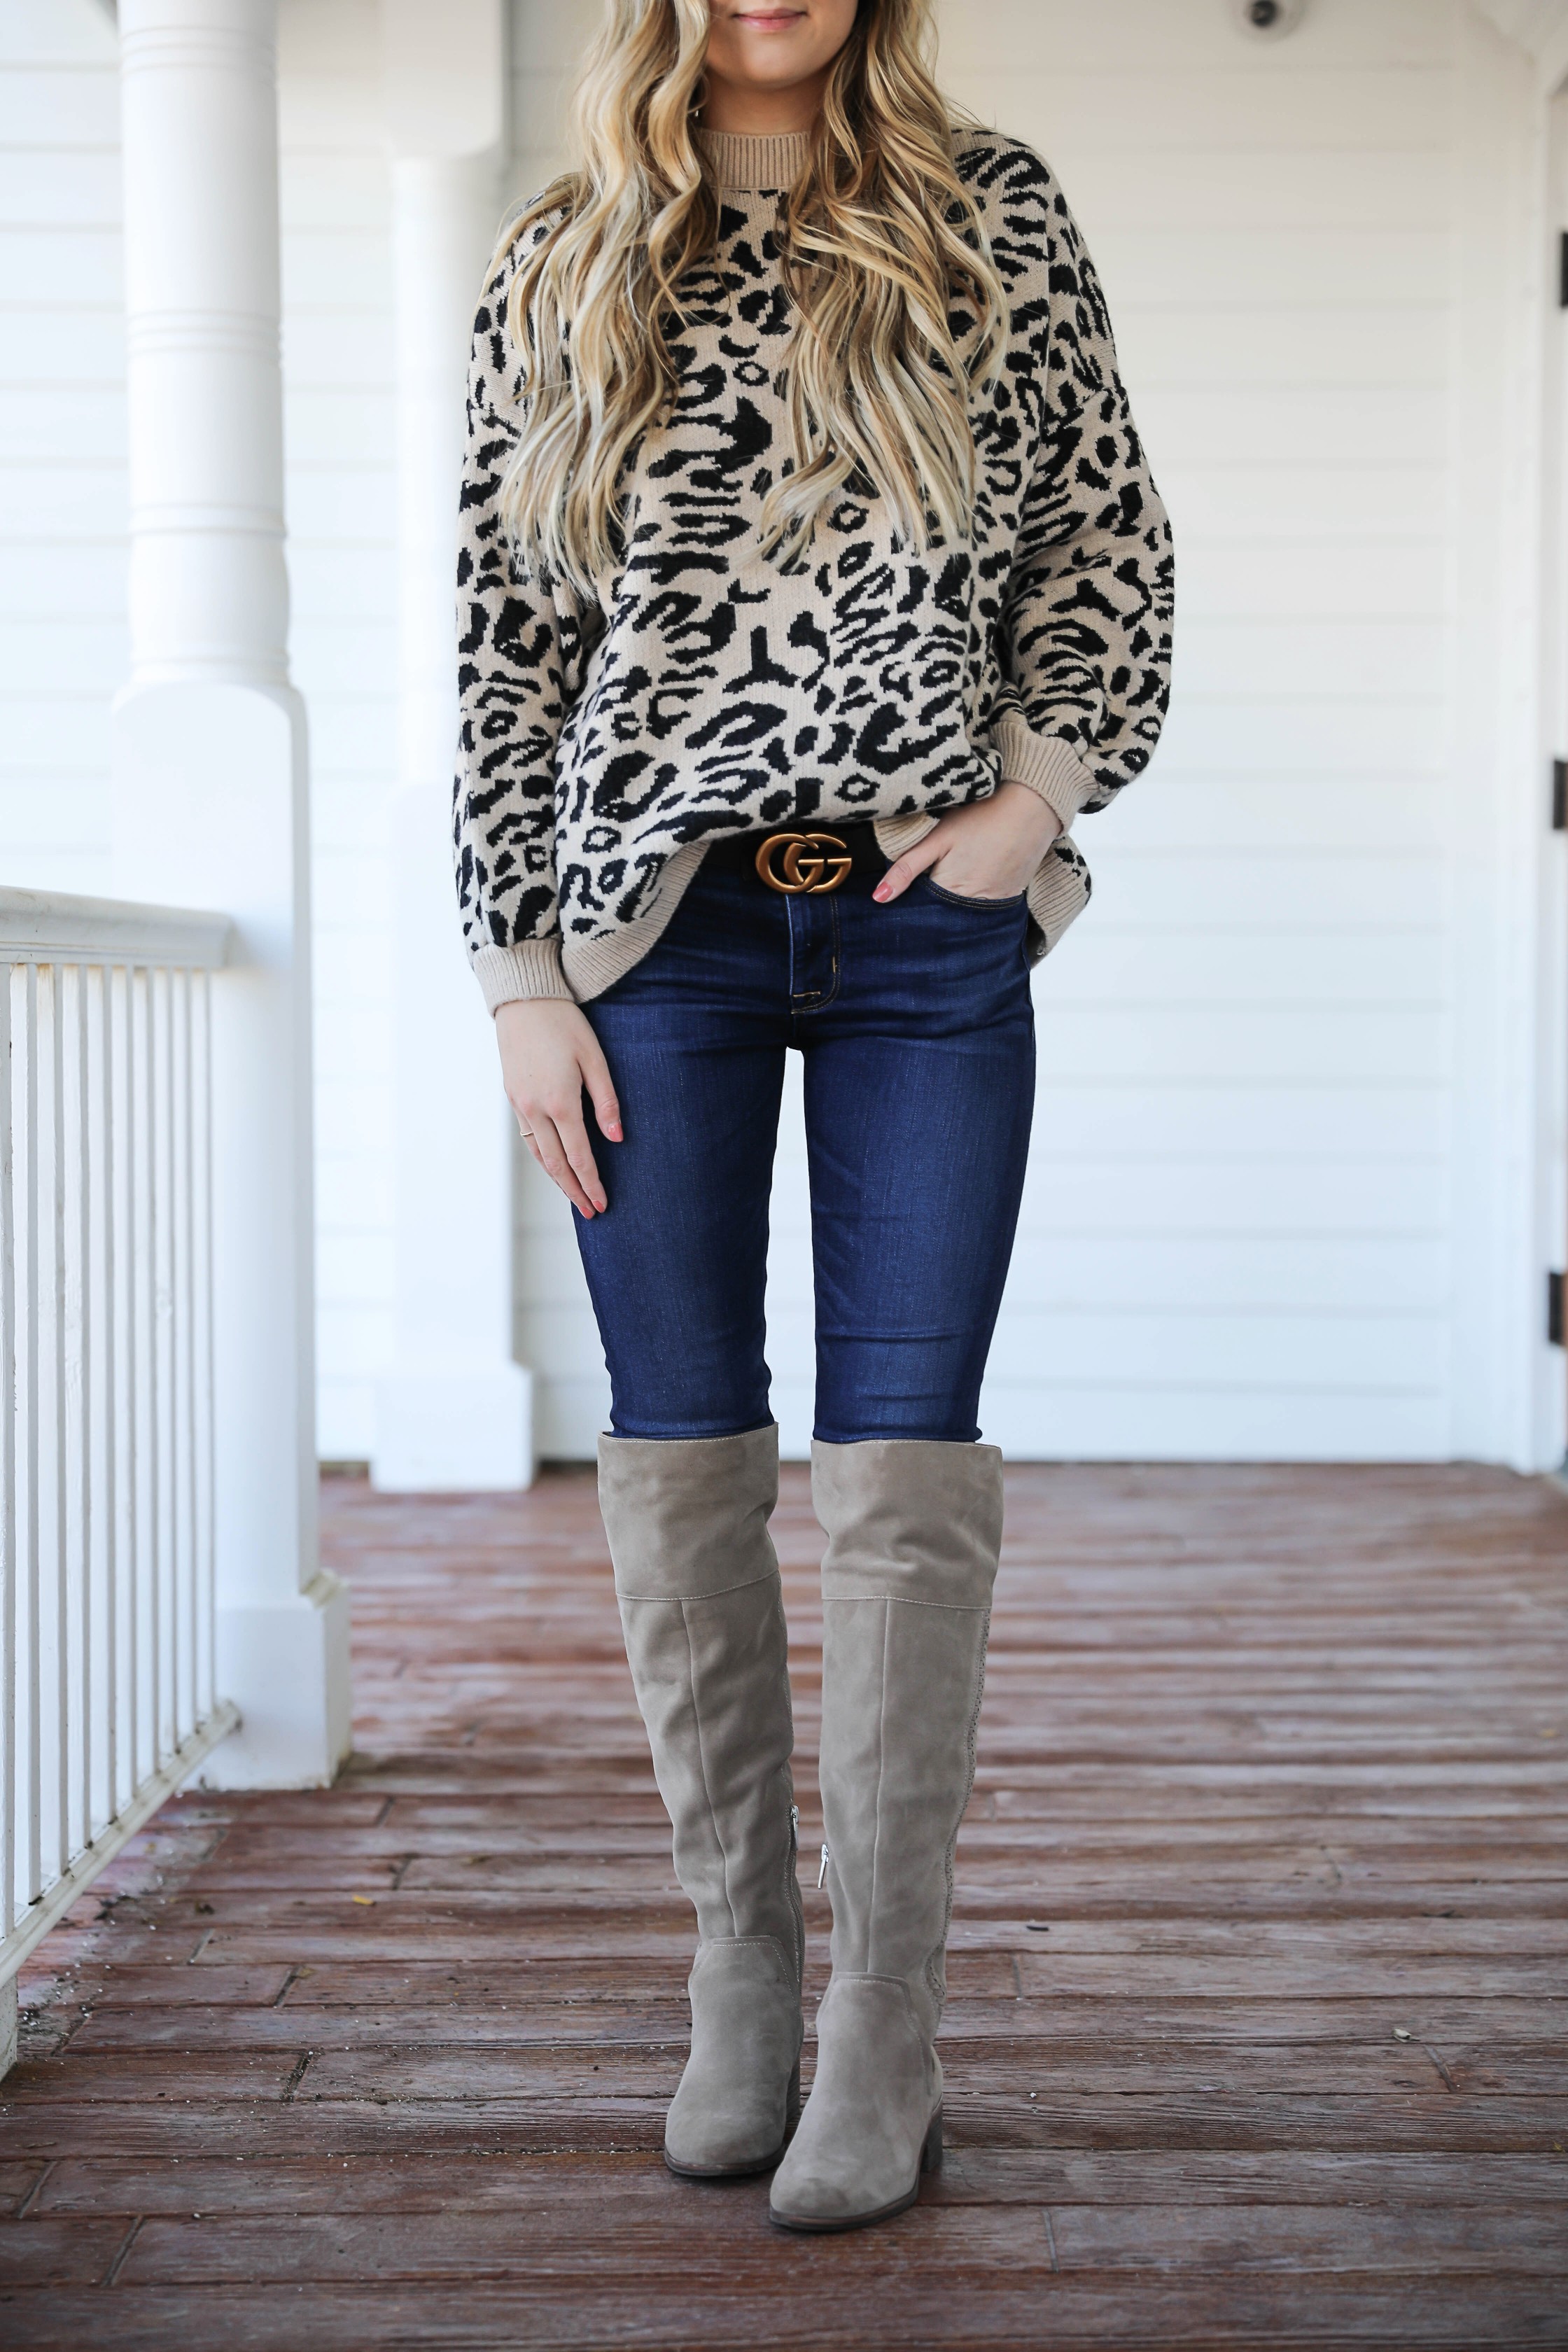 Leopard sweater for fall! Paired with my favorite $30 Gucci belt and Vince Camuto over the knee boots! Such a cute fall outfit idea! Details on fashion blog daily dose of charm by Lauren Lindmark